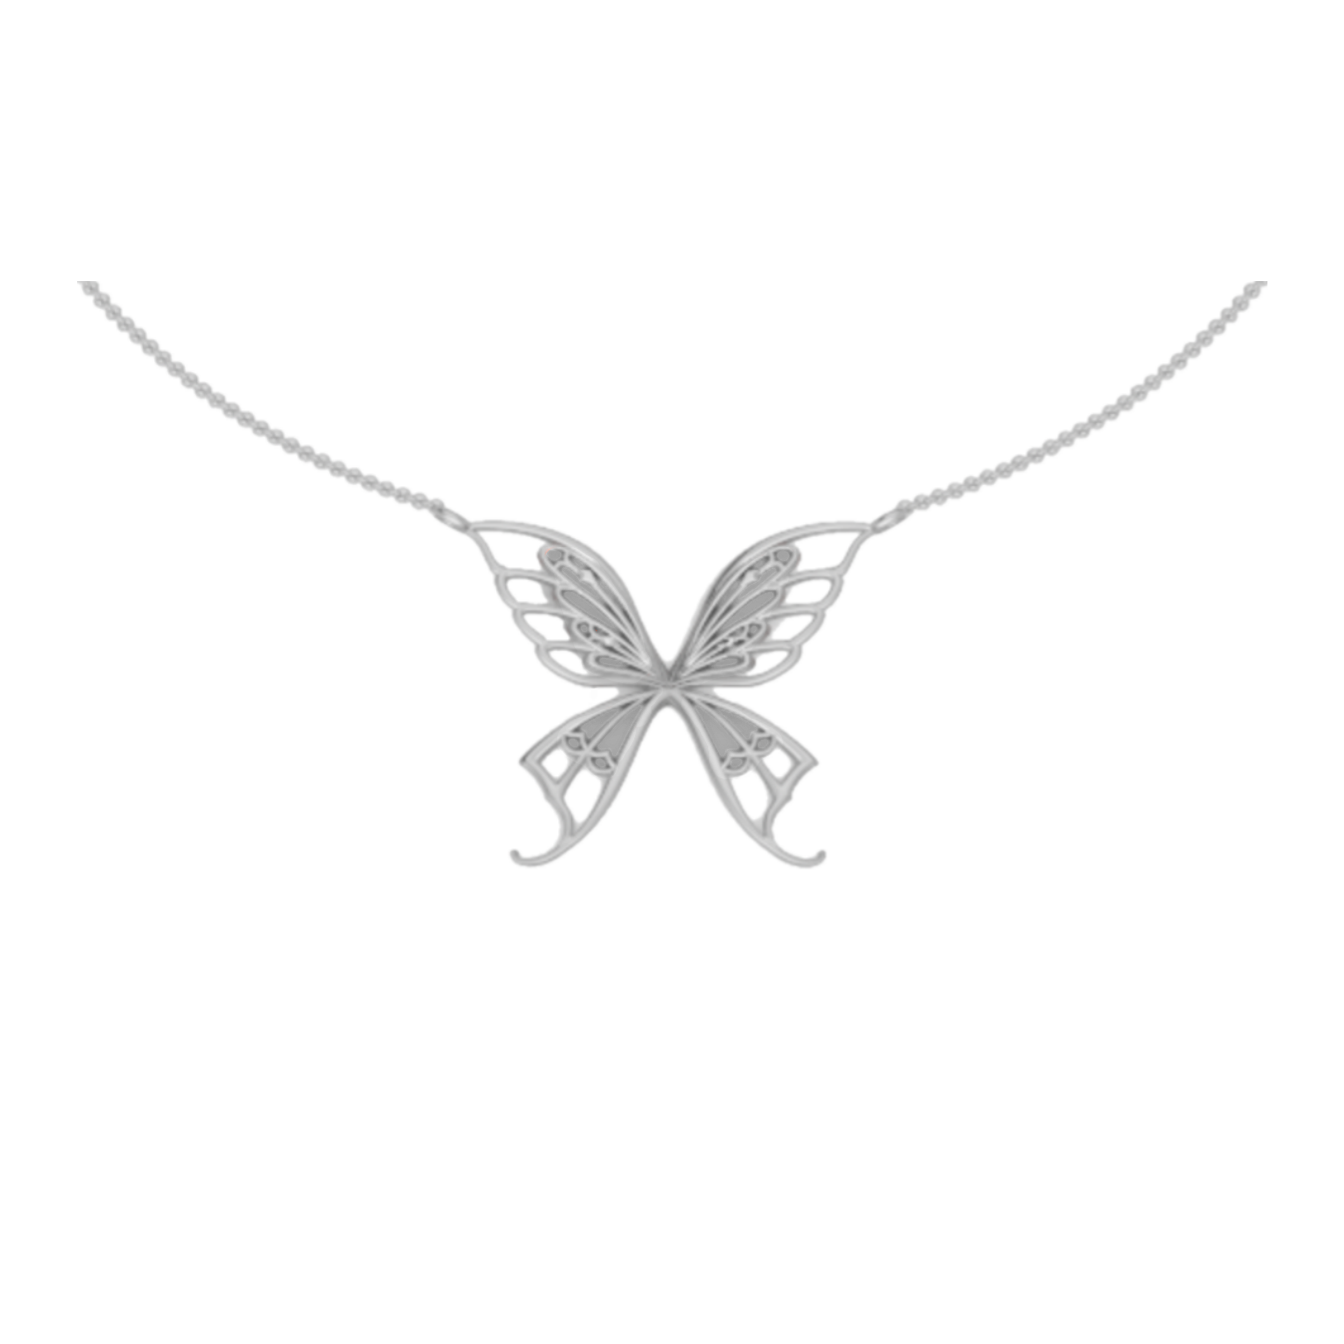 Stella Wings Necklace